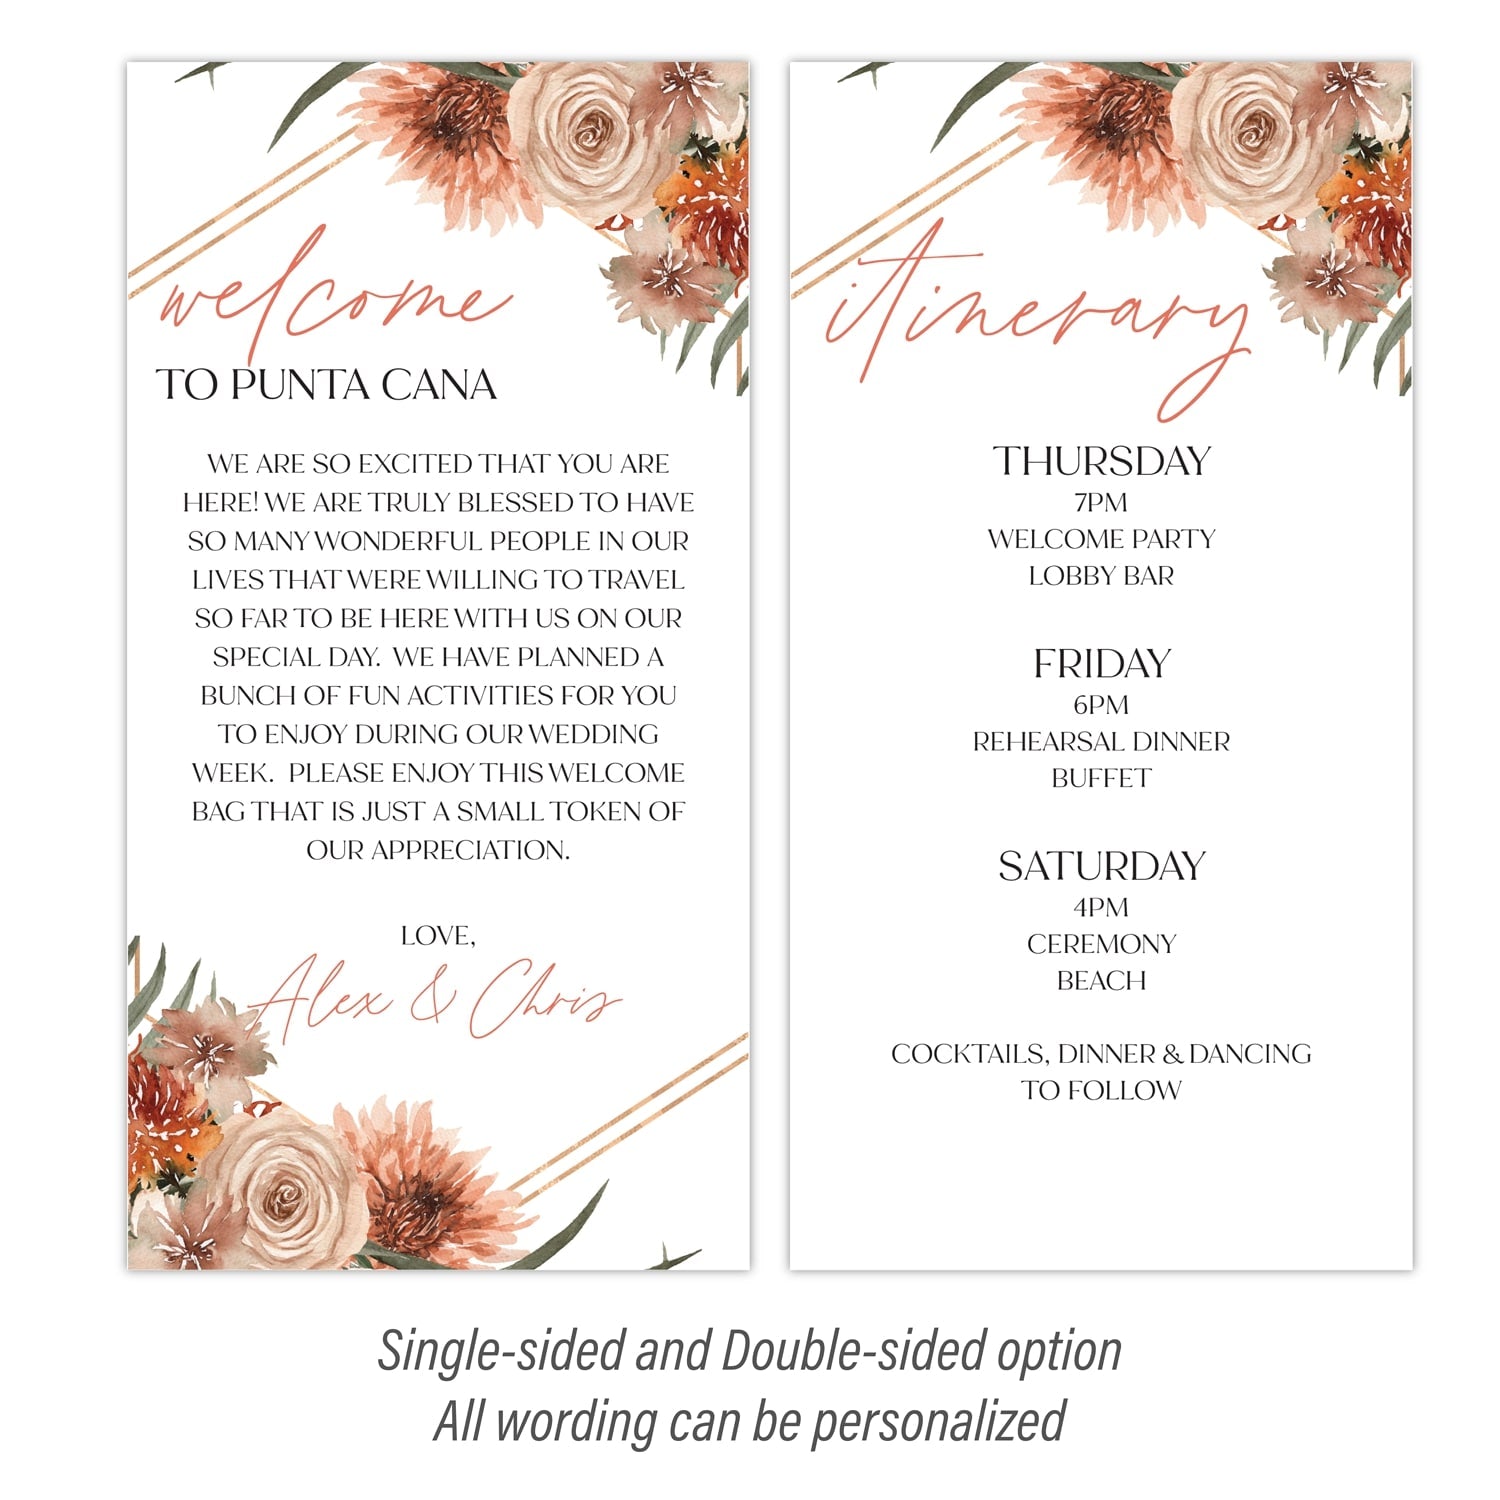 Wedding Welcome Letter & Itinerary | Terracotta